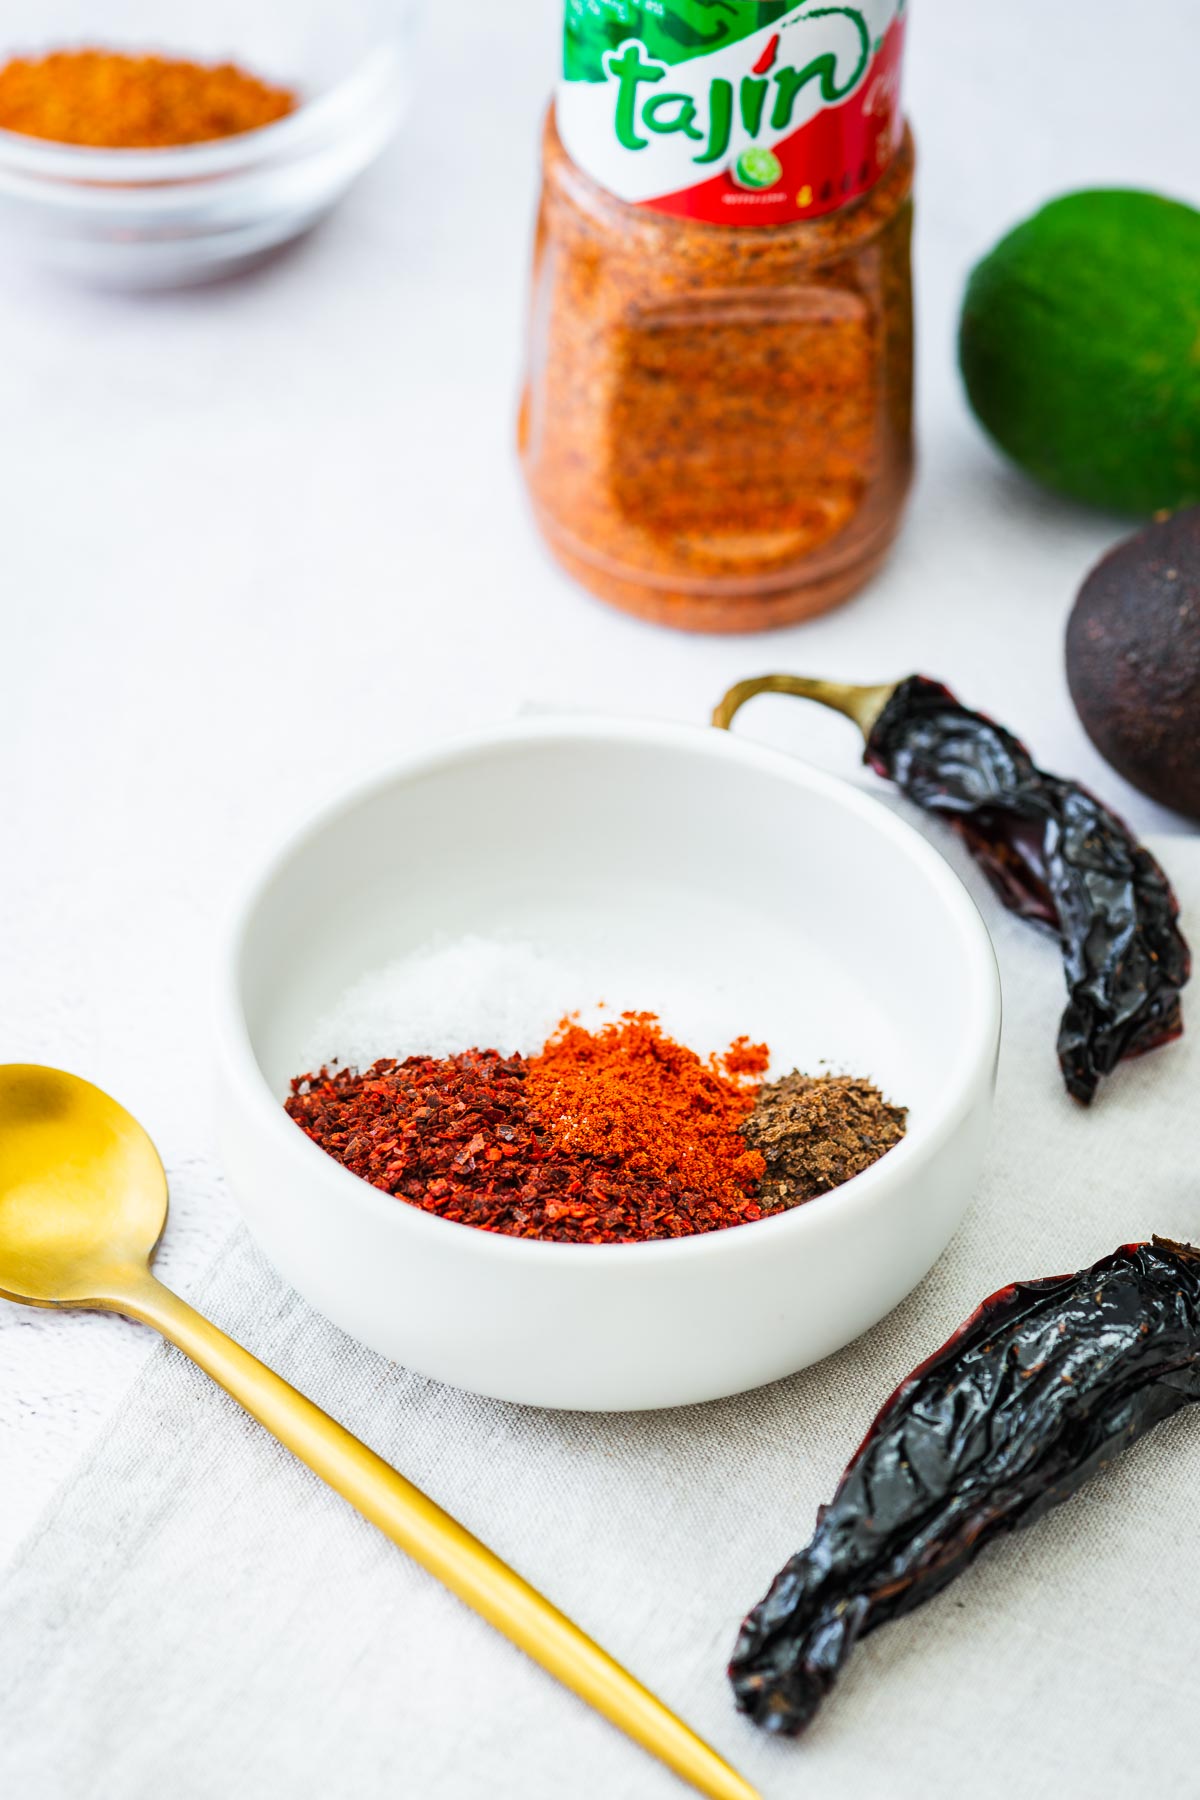 The ingredients for a tajin substitute blend in a small white bowl, including smoked paprika, chilli flakes, black lime powder, salt and citric acid.